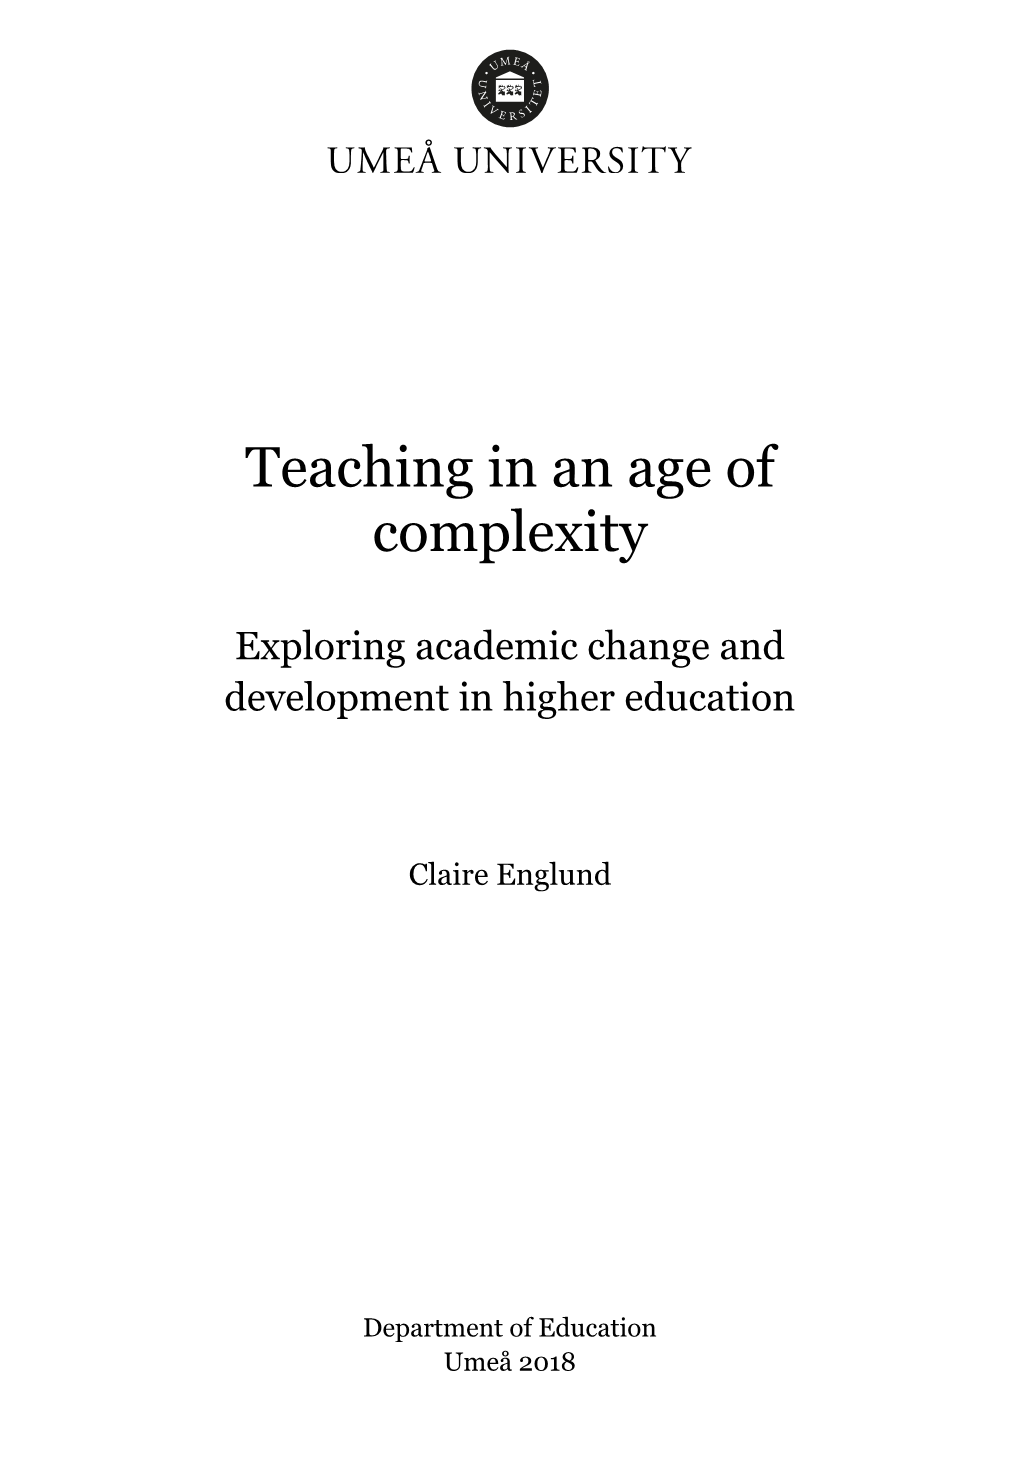 Teaching in an Age of Complexity